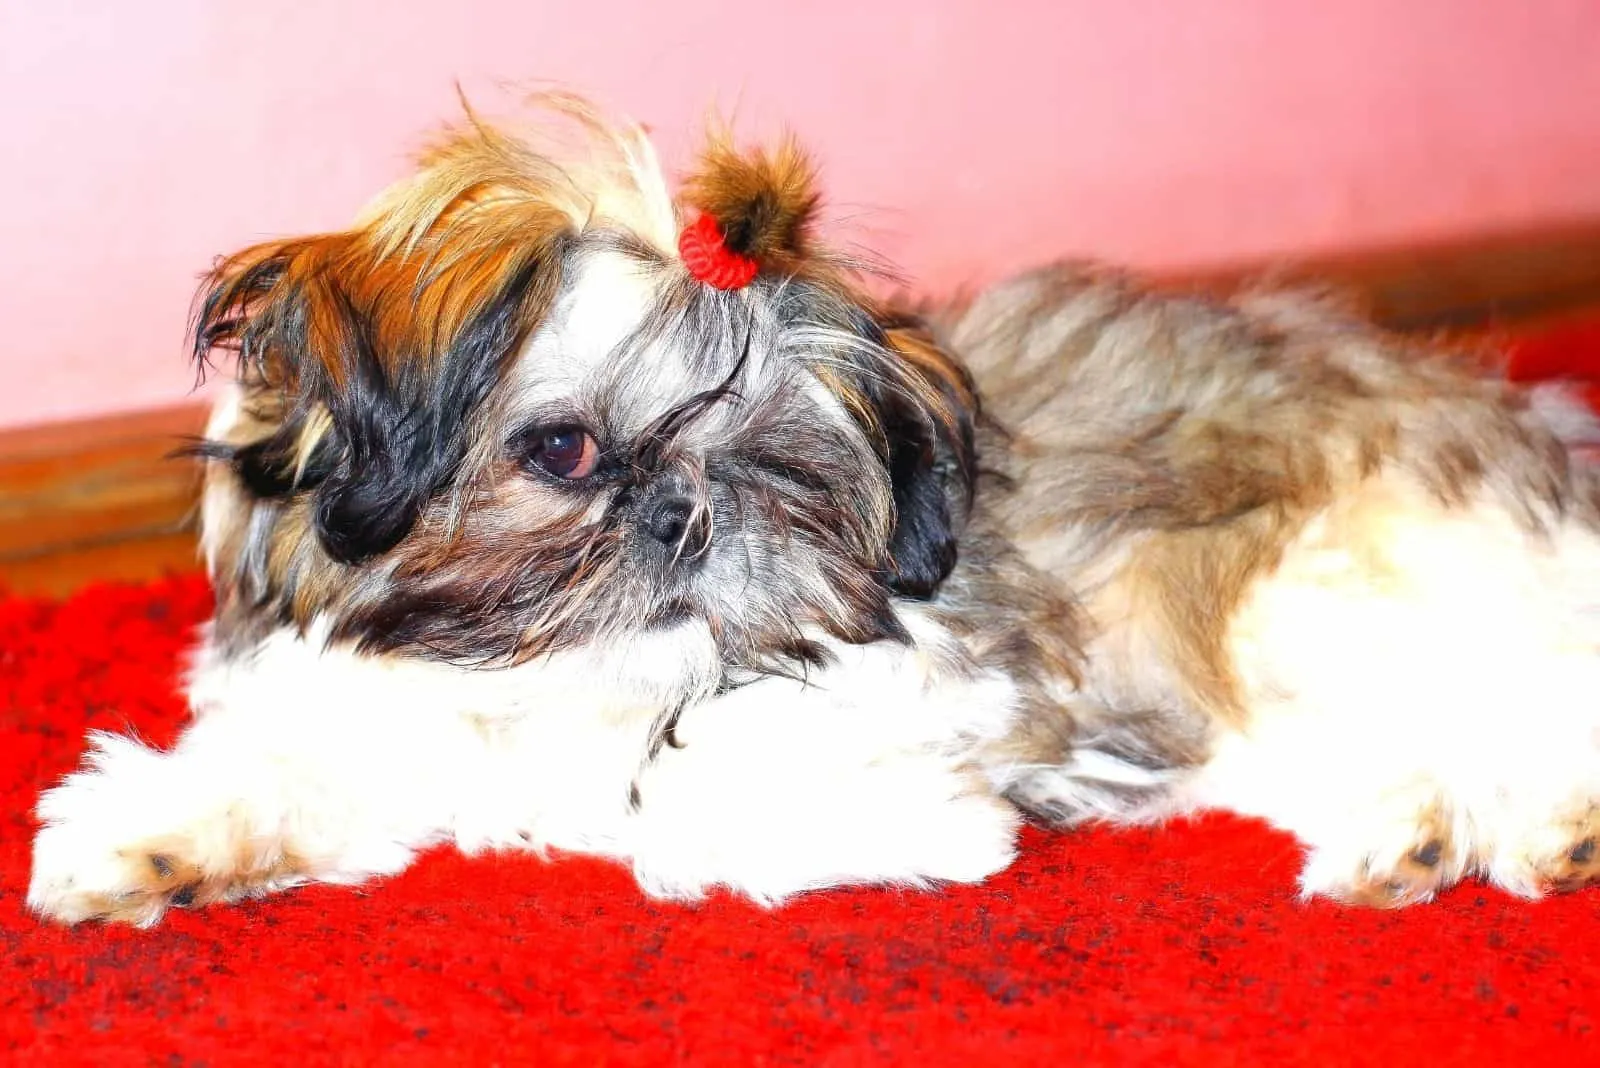 gold shih tzu puppy with black tips lying down on red carpet